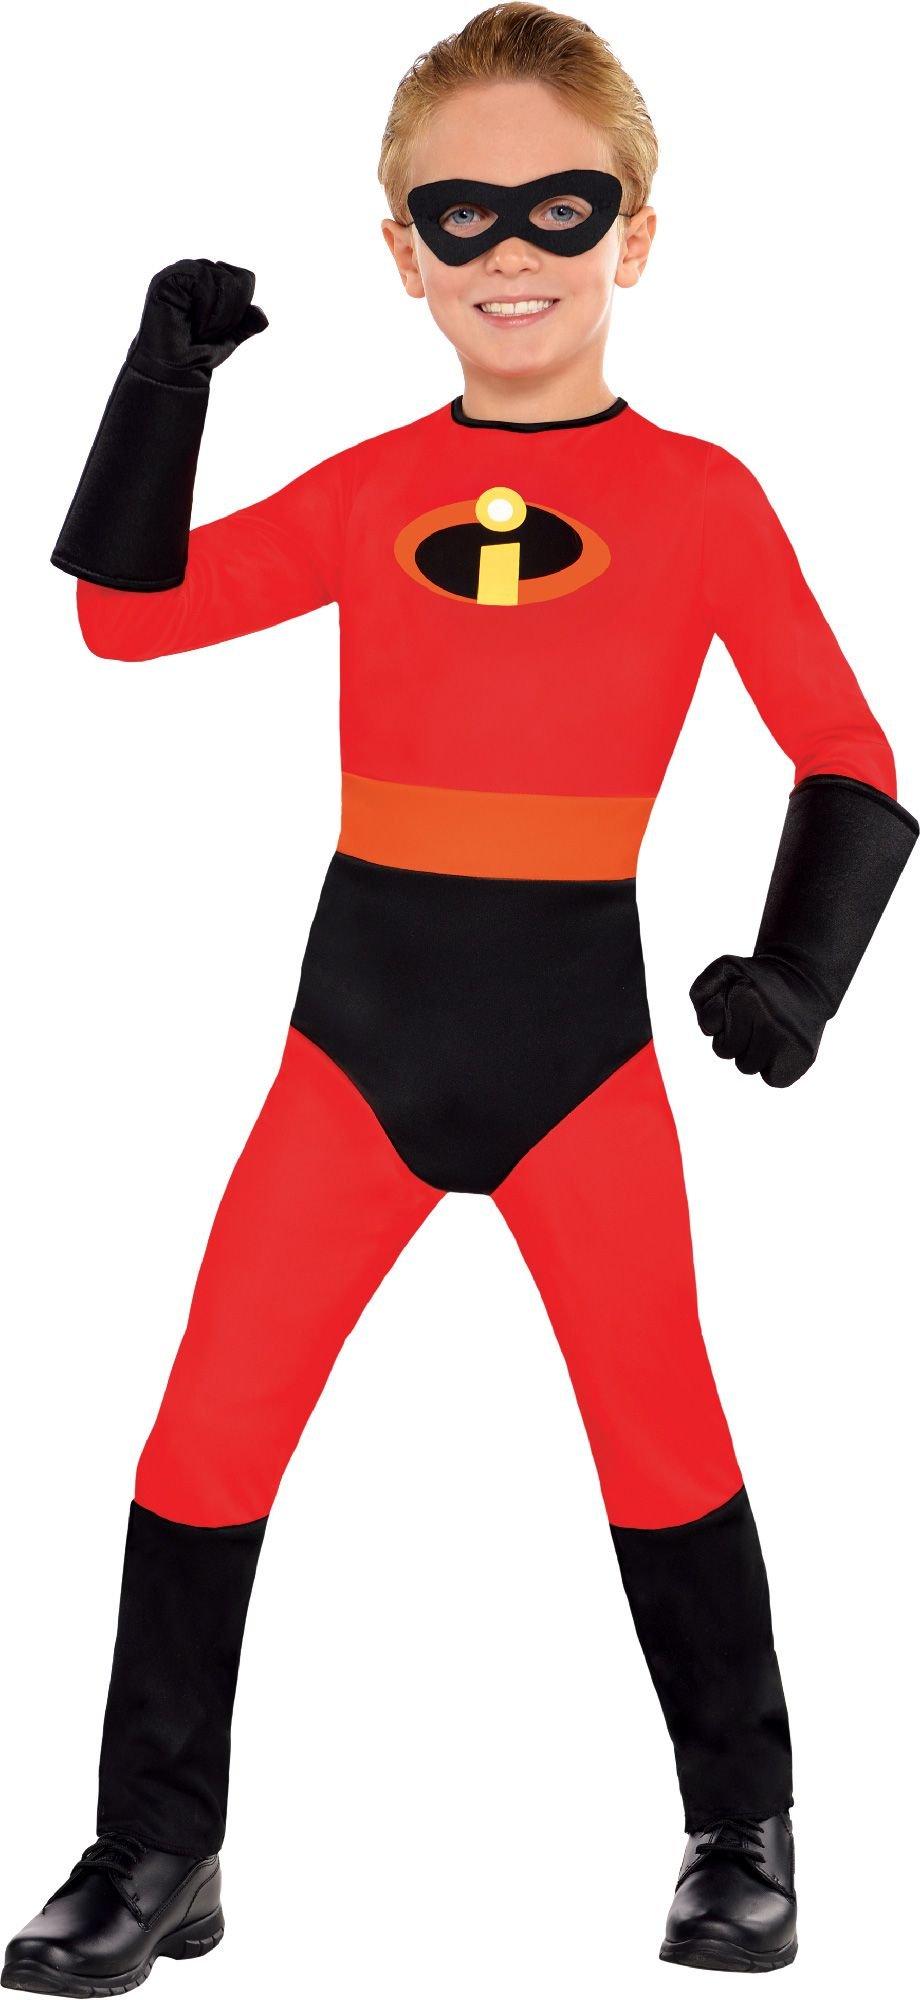 Boys Dash Costume - The Incredibles | Party City